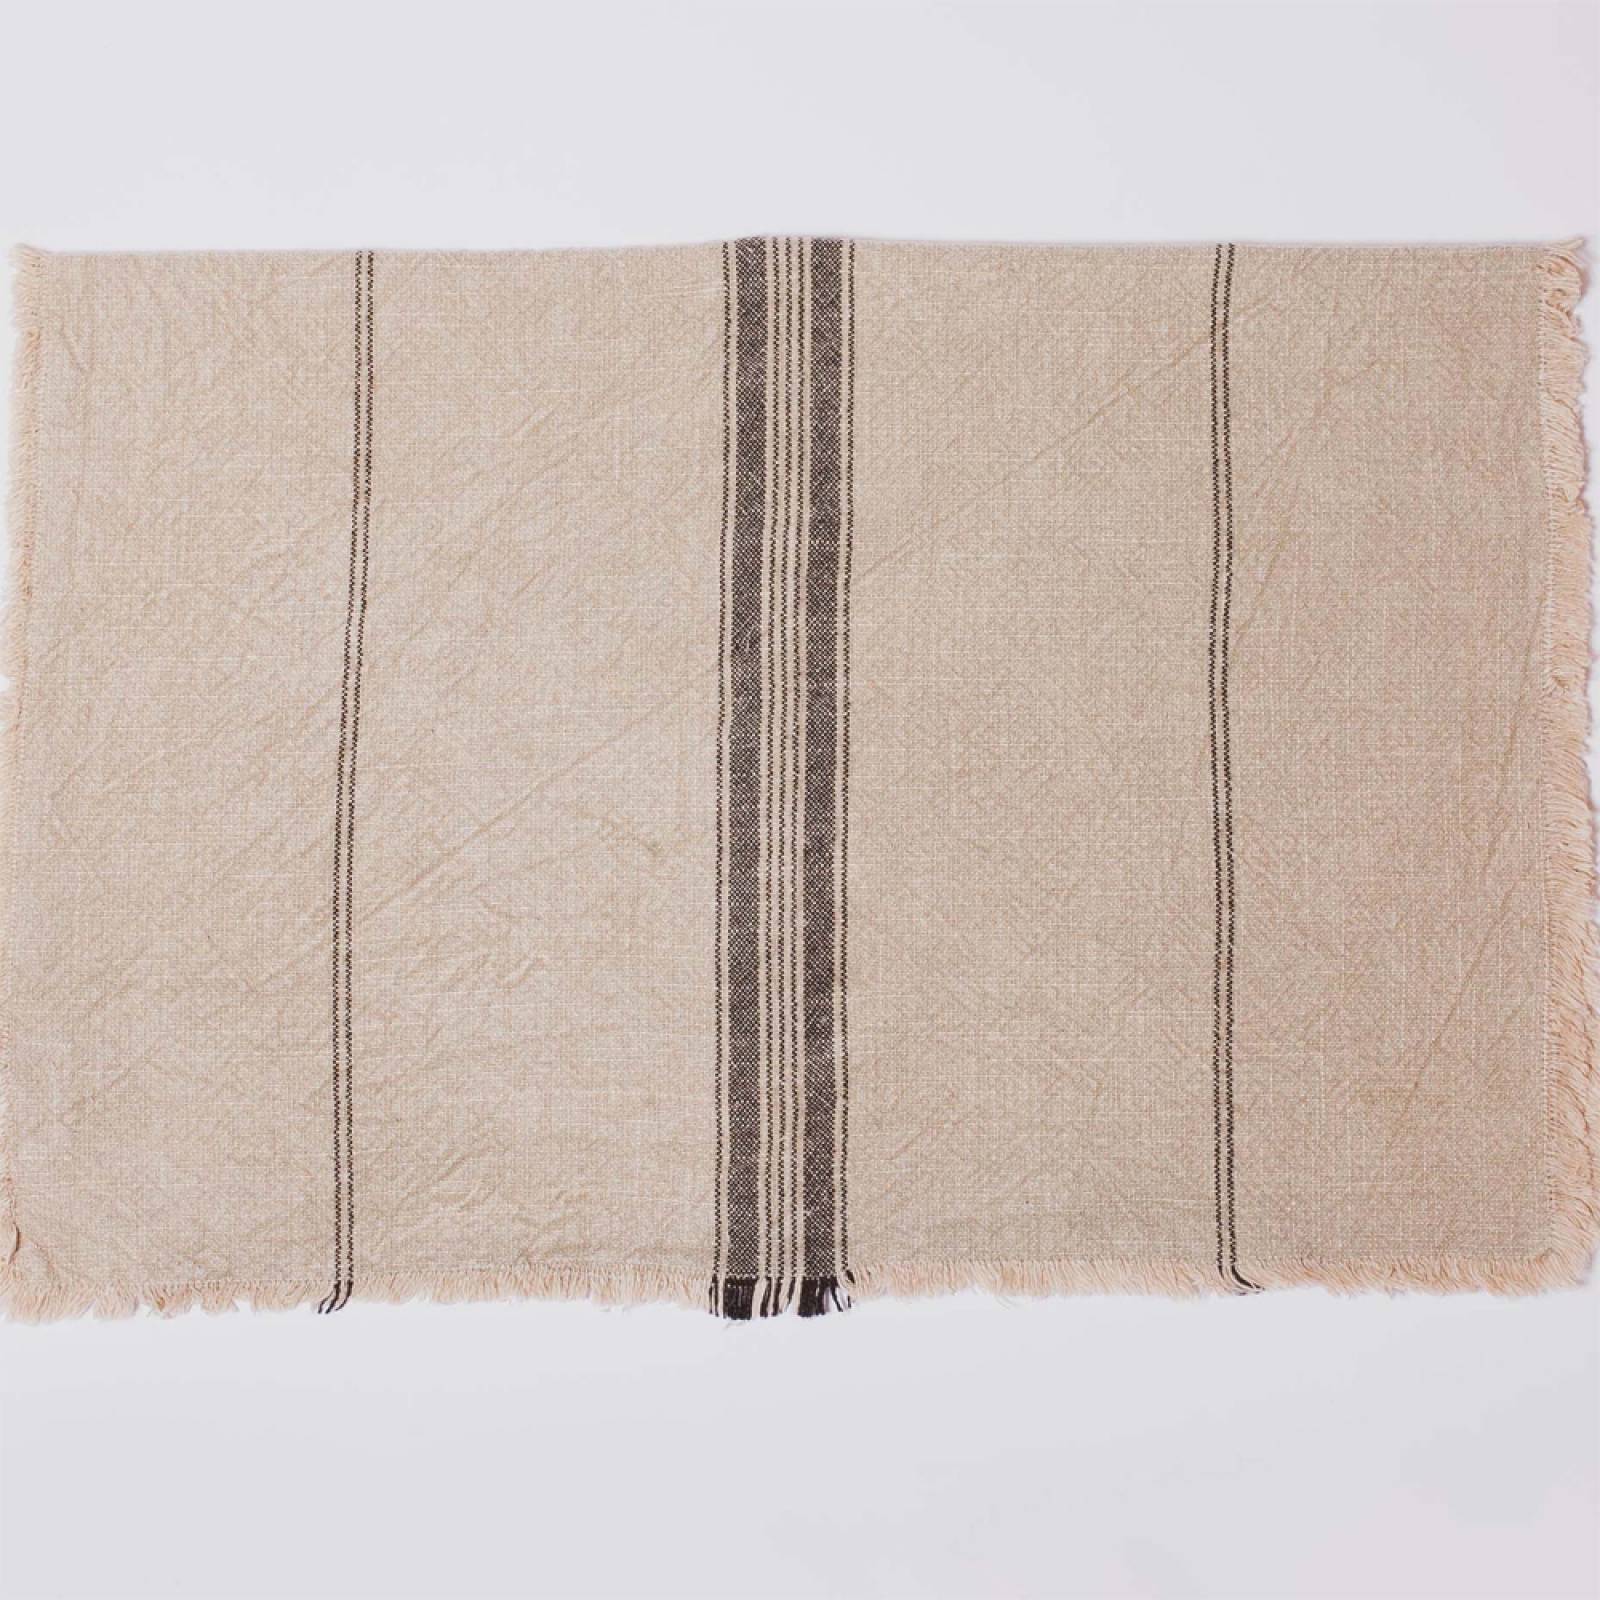 Striped Cotton Tea Towel With Fringing In Khaki thumbnails